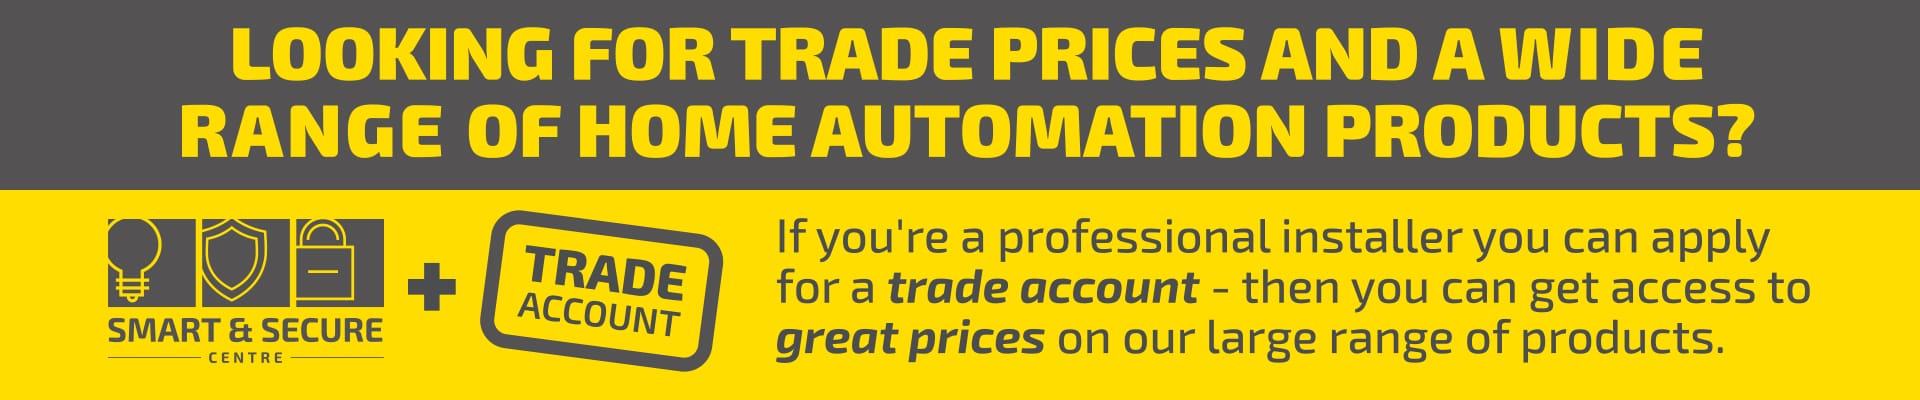 s-and-s-trade-offers-email-banner-1920x400